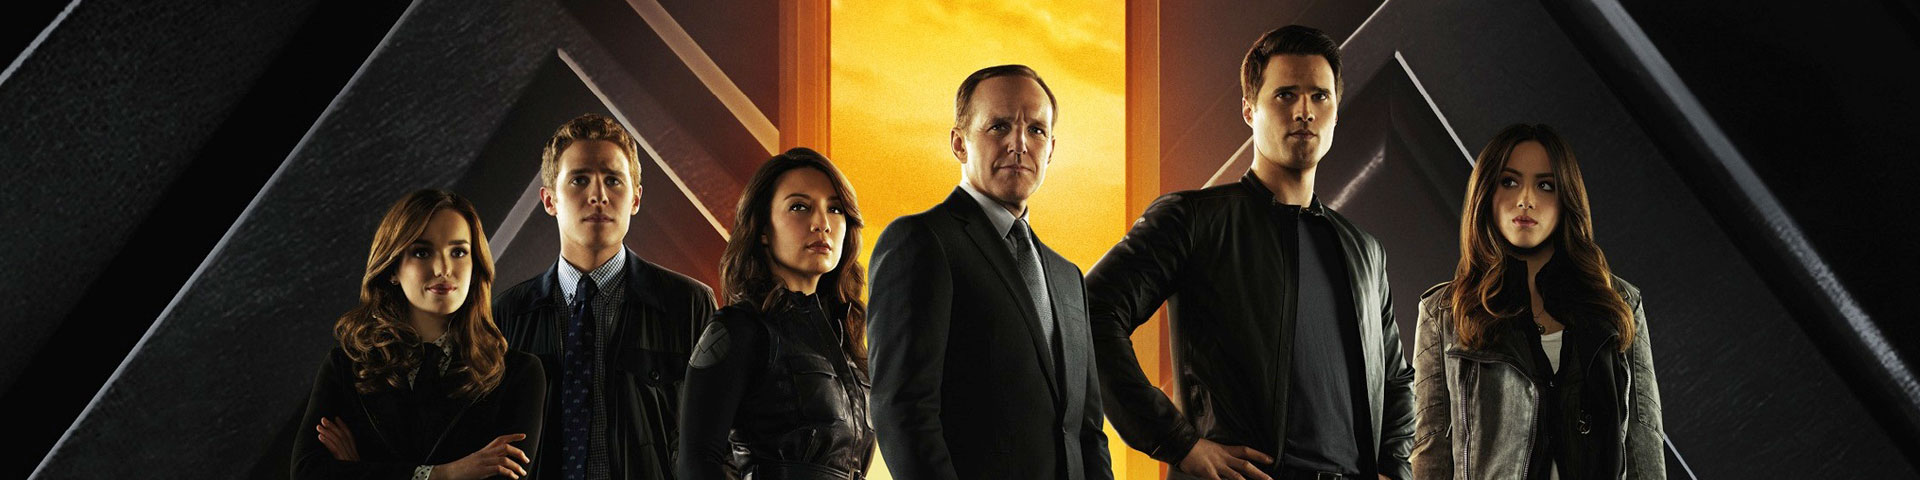 The 6 cast members of Season 1 stand in front the S.H.I.E.L.D. logo. The logo is split by a bright yellow/orange flame.